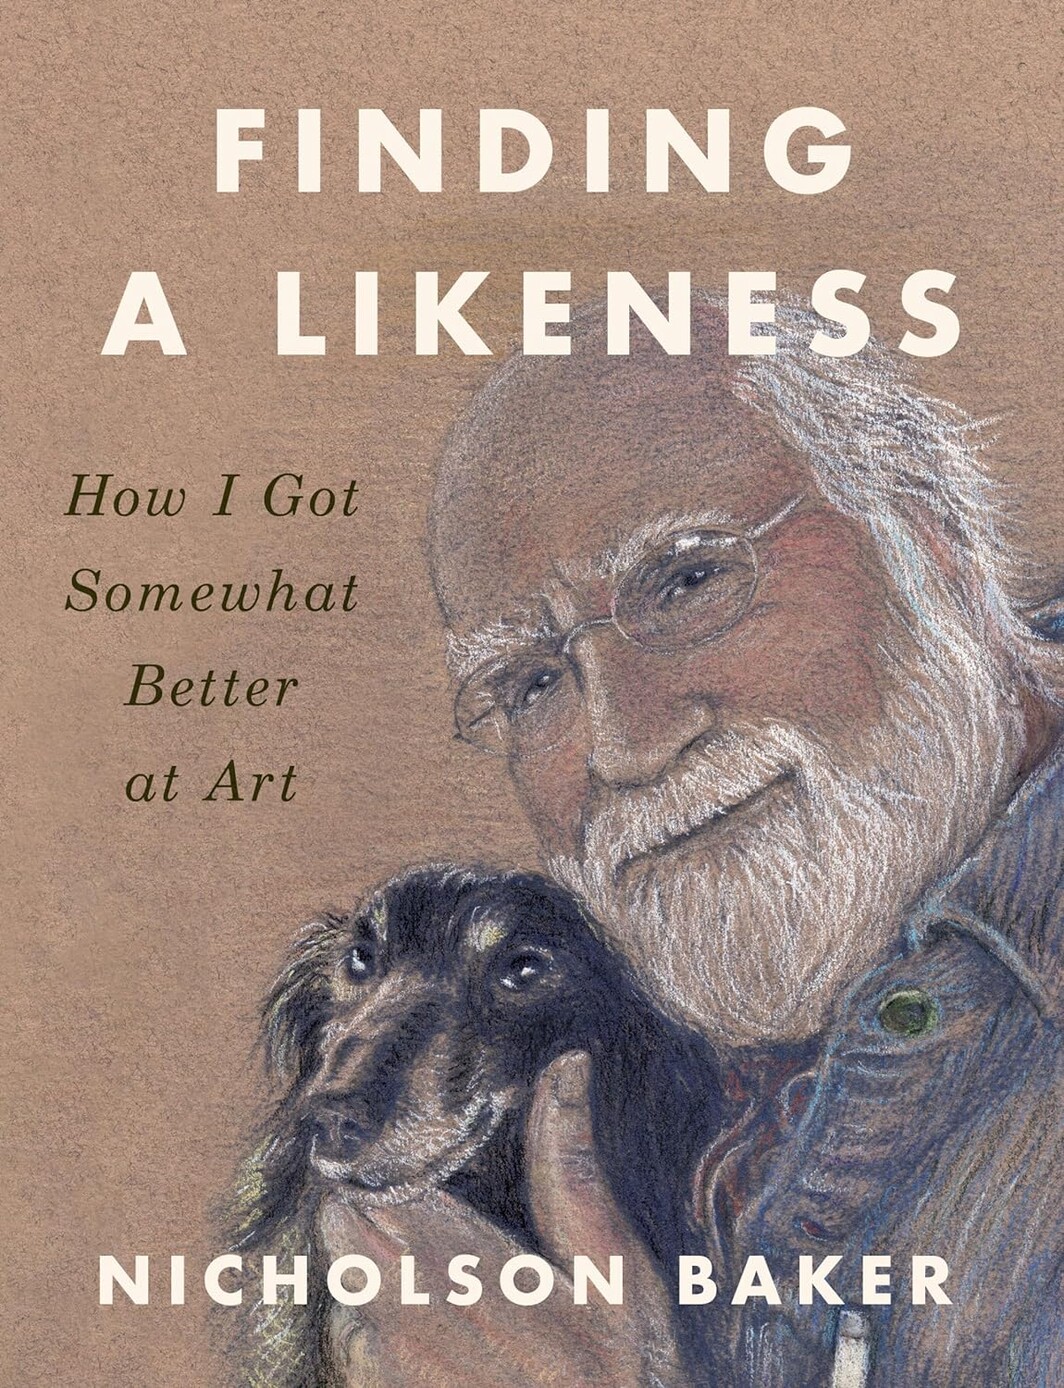 The cover of Finding a Likeness: How I Got Somewhat Better at Art